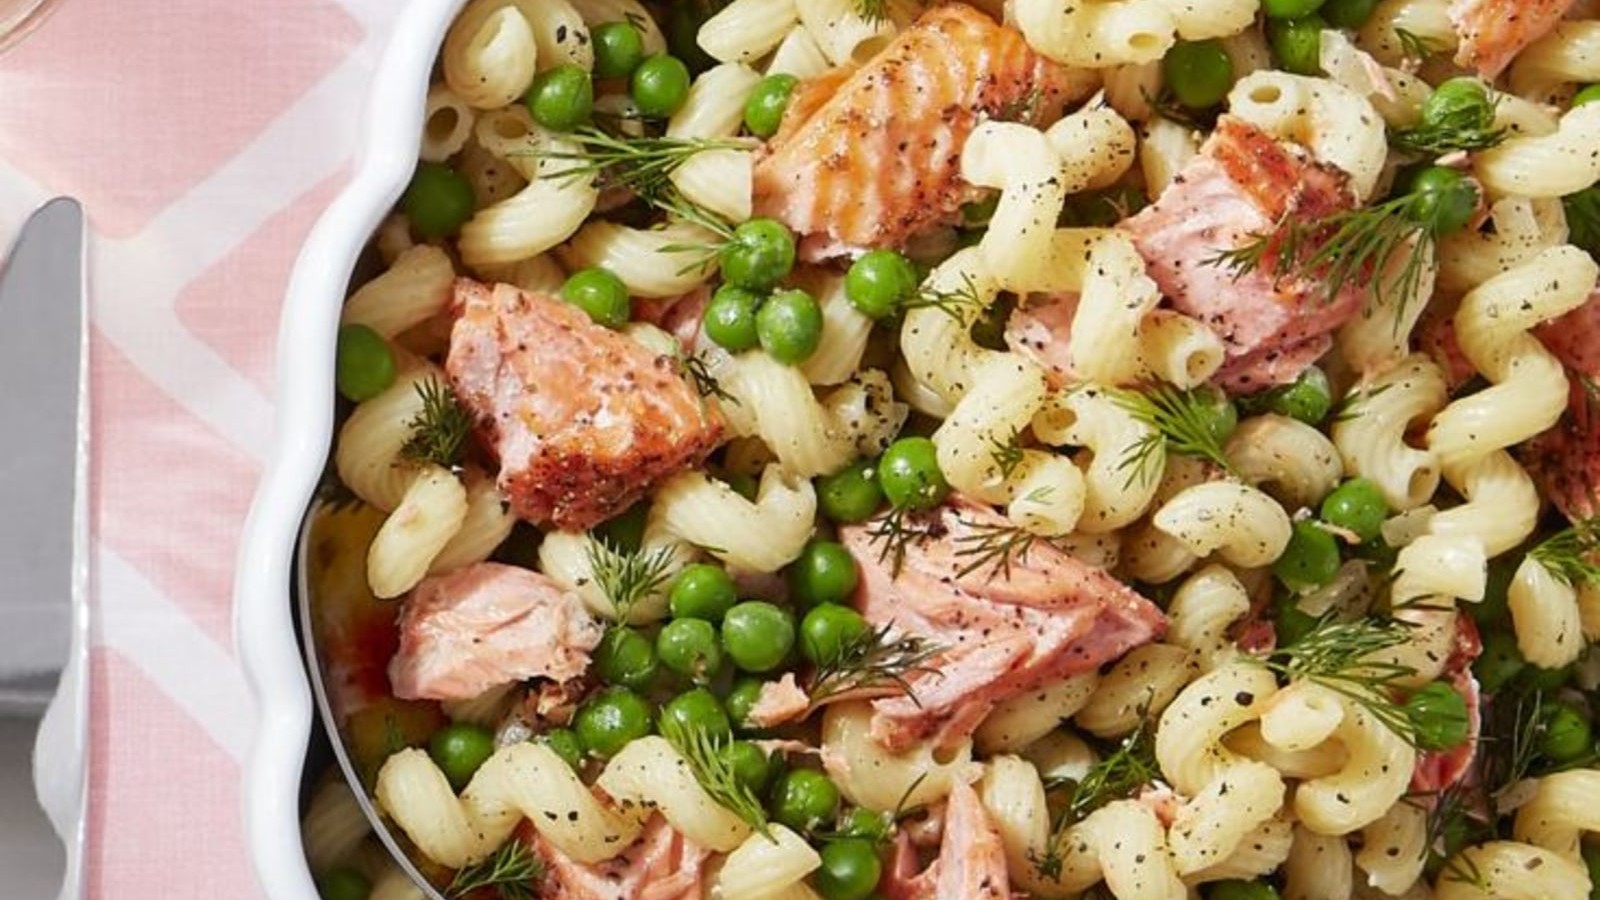 Image of Spring Pasta with Salmon, Peas, and Dill